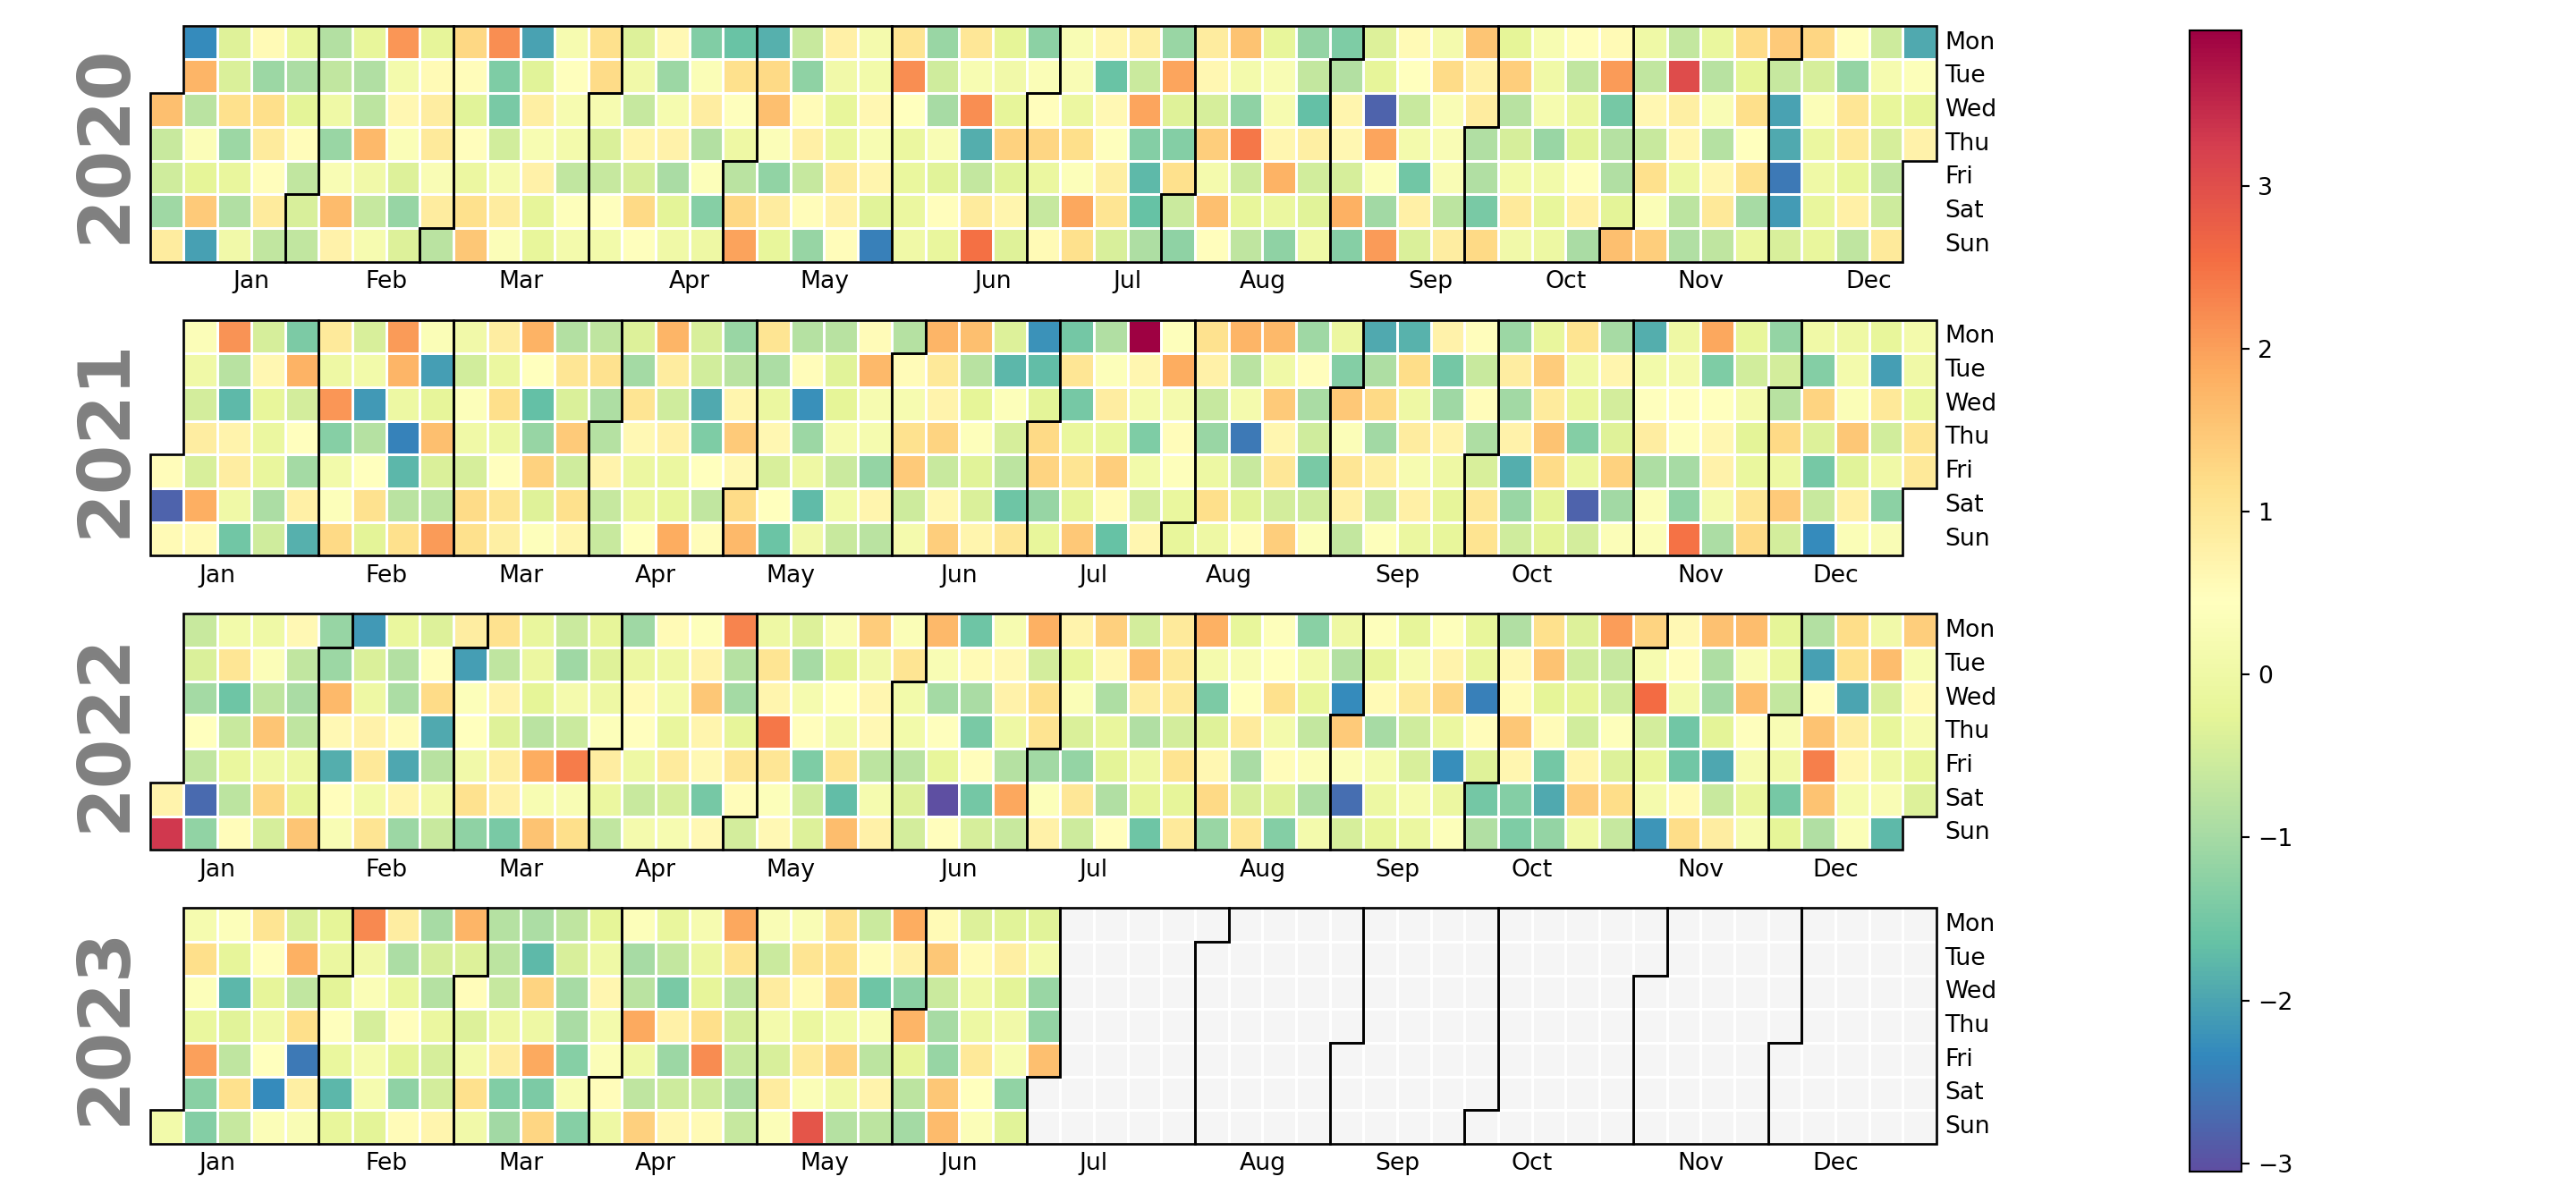 Color of the lines of the months in calplot